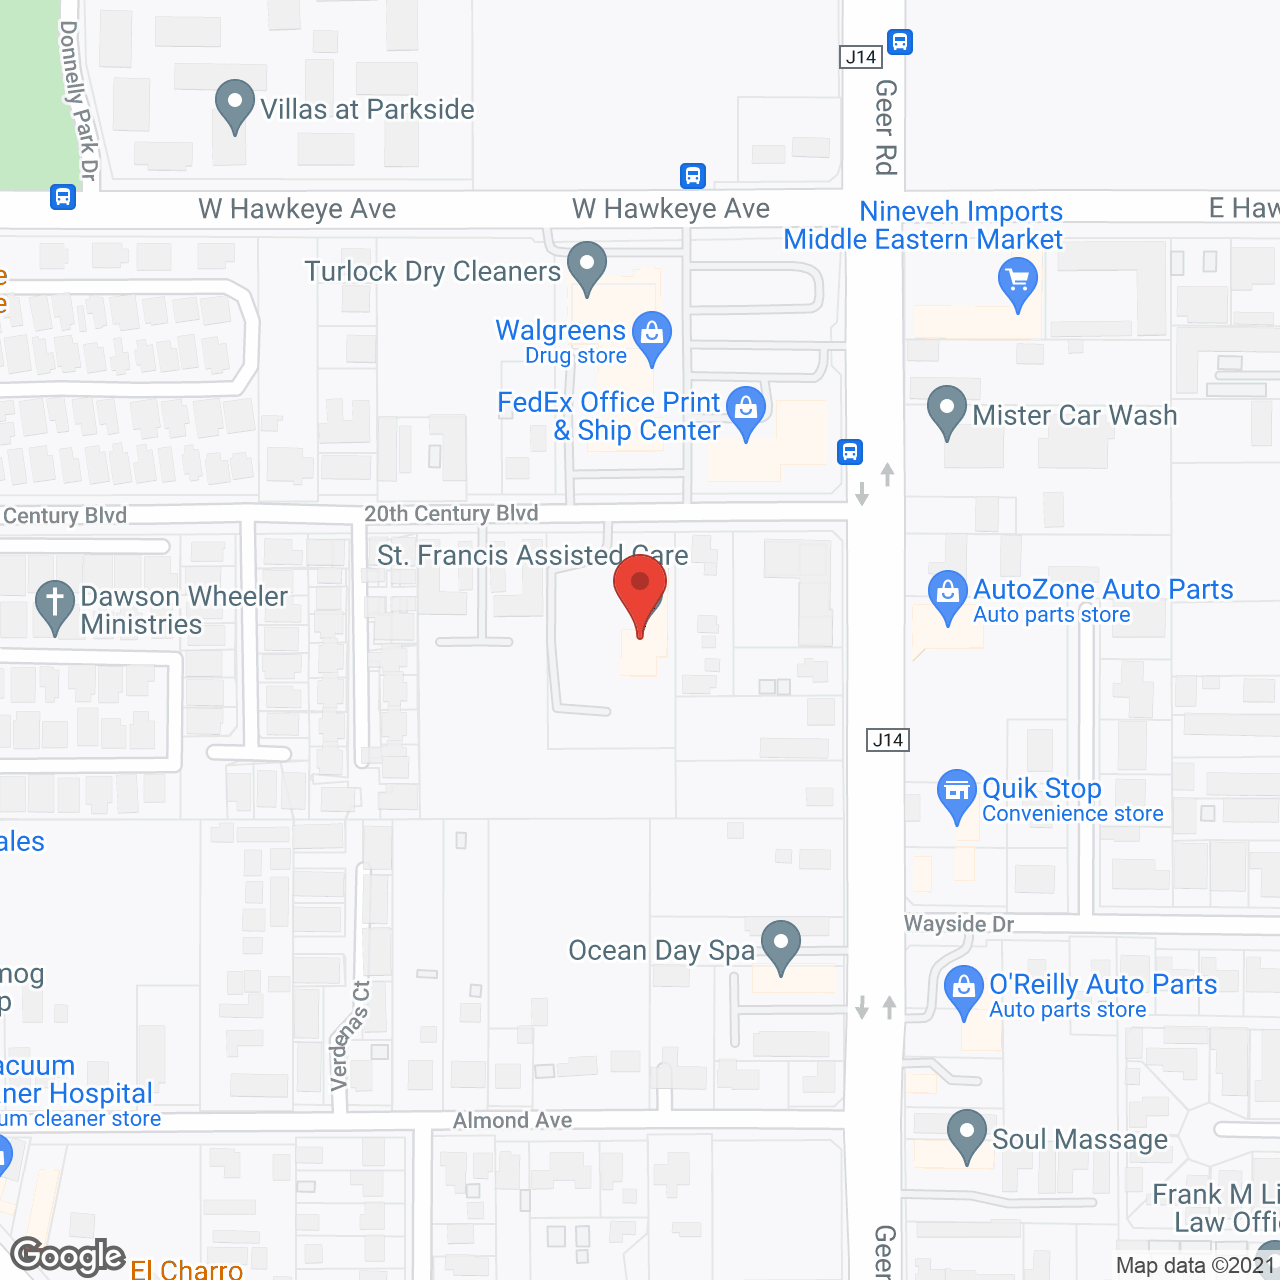 St. Francis Assisted Care in google map